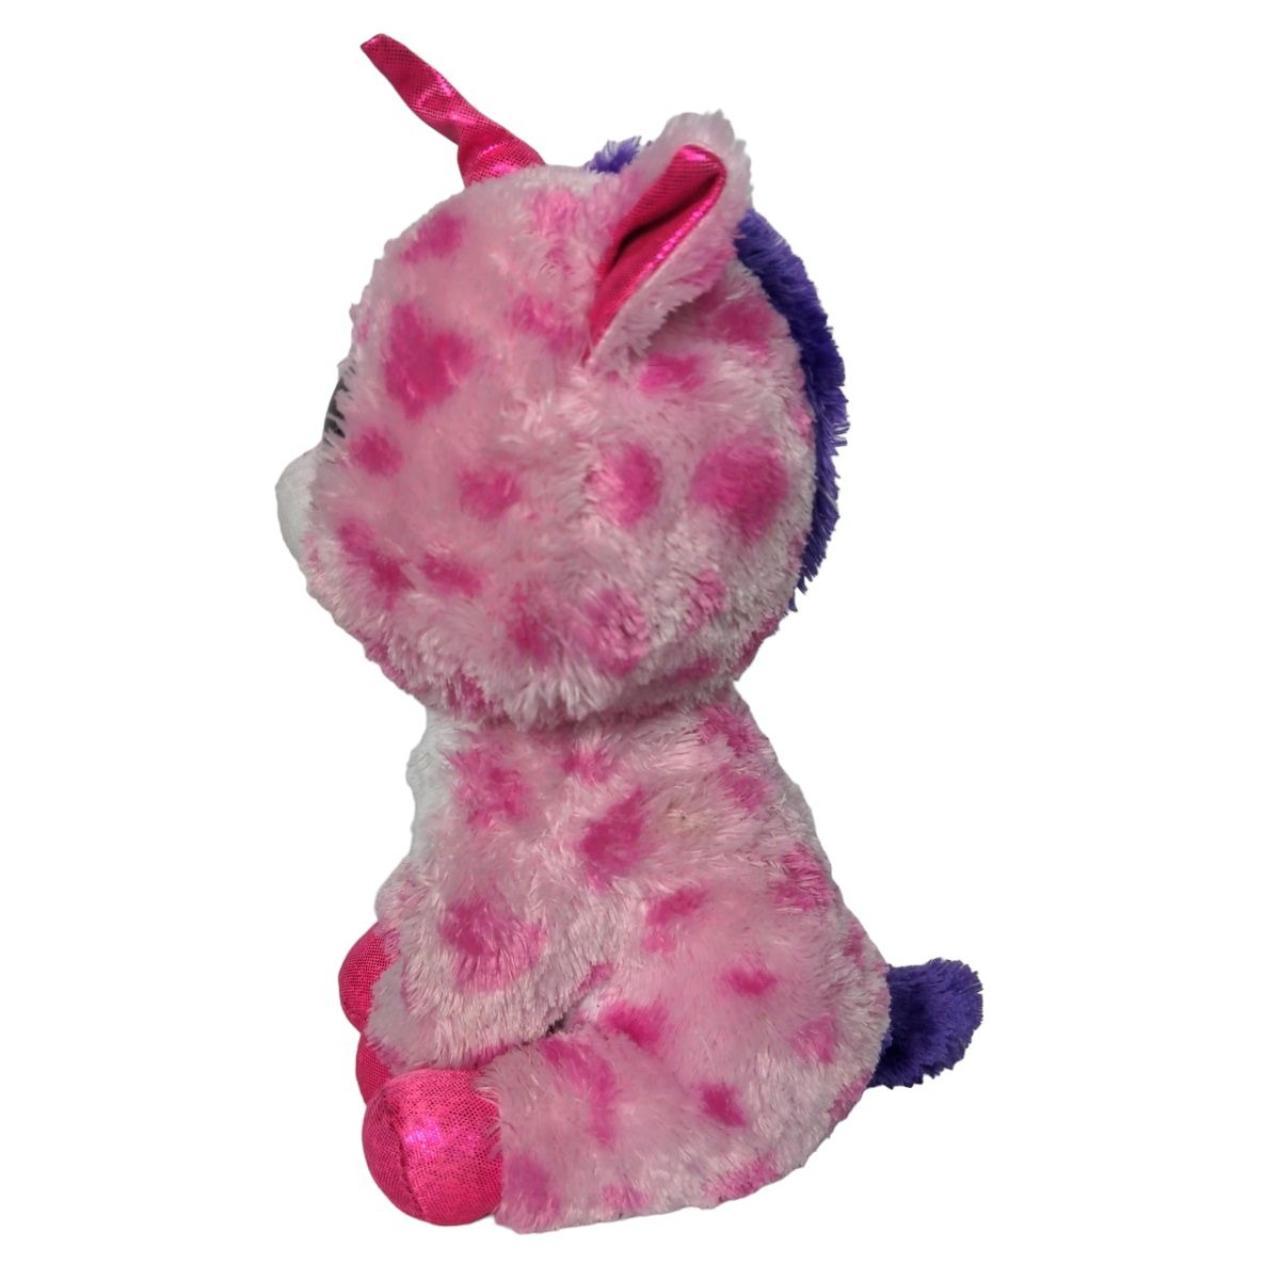 TY BEANIE BOO PINK UNICORN, St. Louis (MO) Plush & Stuffed Animal Delivery